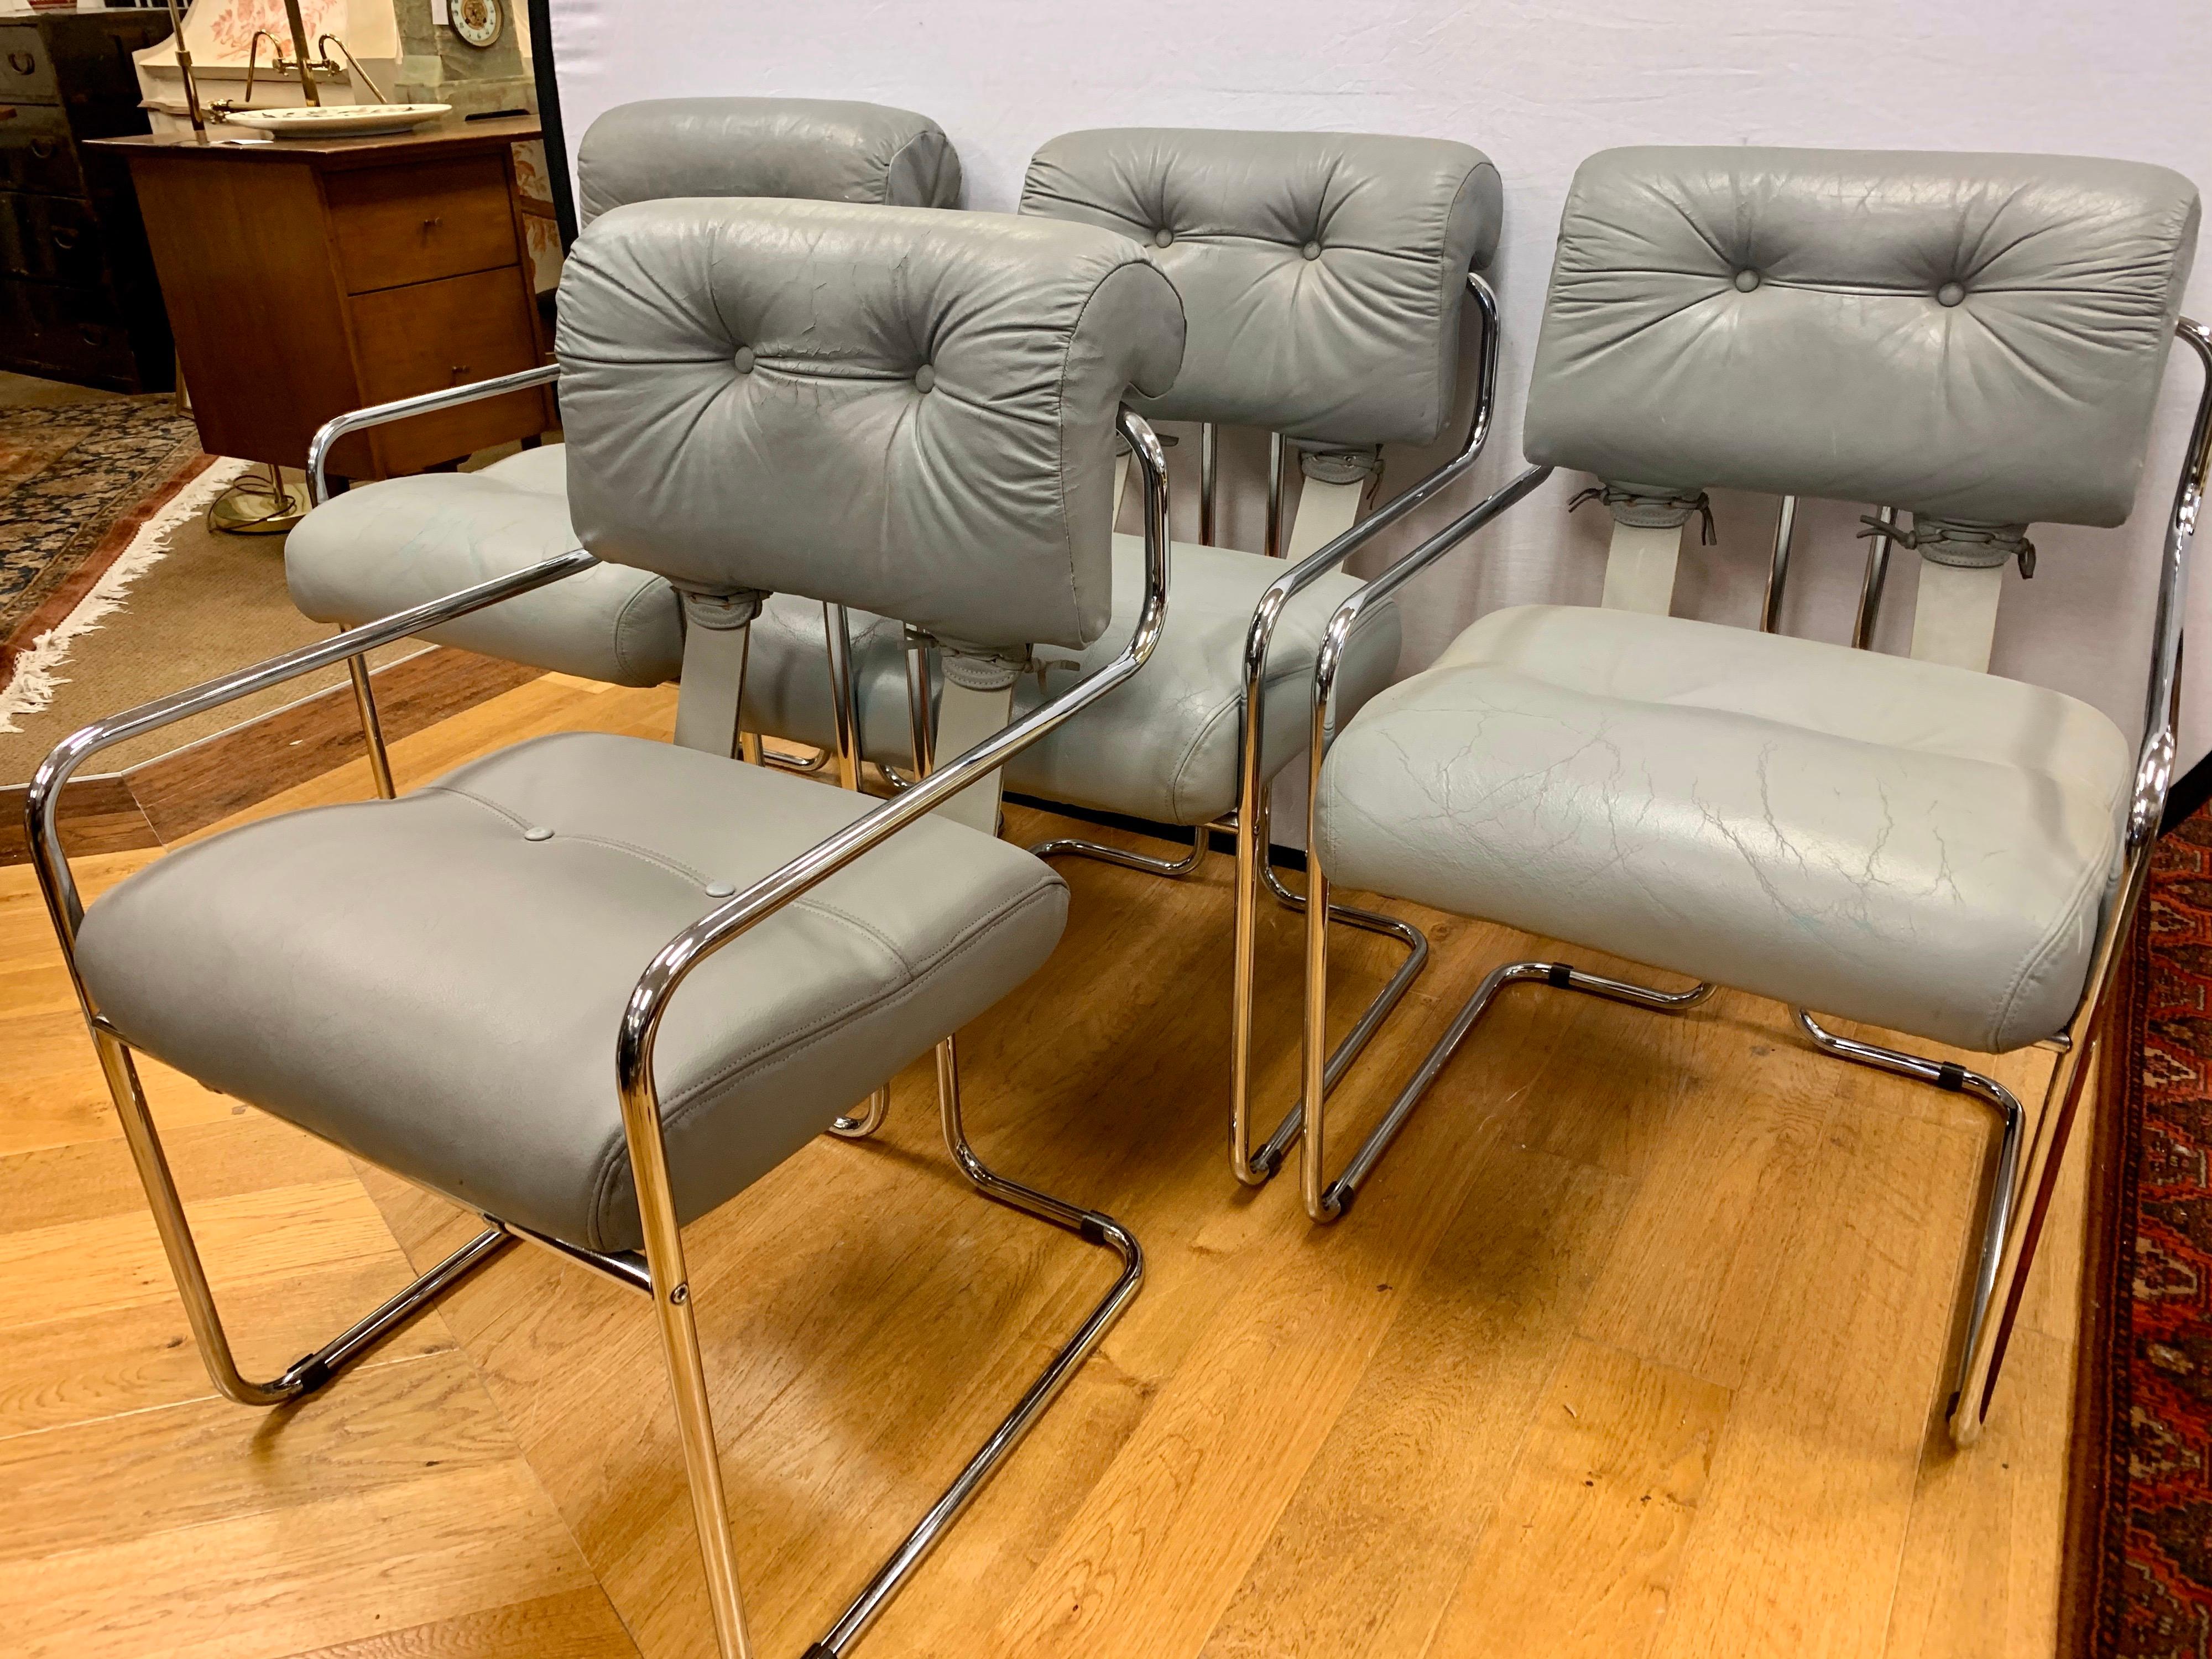 Rare chome and leather dining chairs by Guido Faleschini for Pace collection and manufactured by i4 Mariani in Italy. All vendor hallmarks are present at bottom, circa 1980s. Note the soft gray leather has wear on each chair and this has been